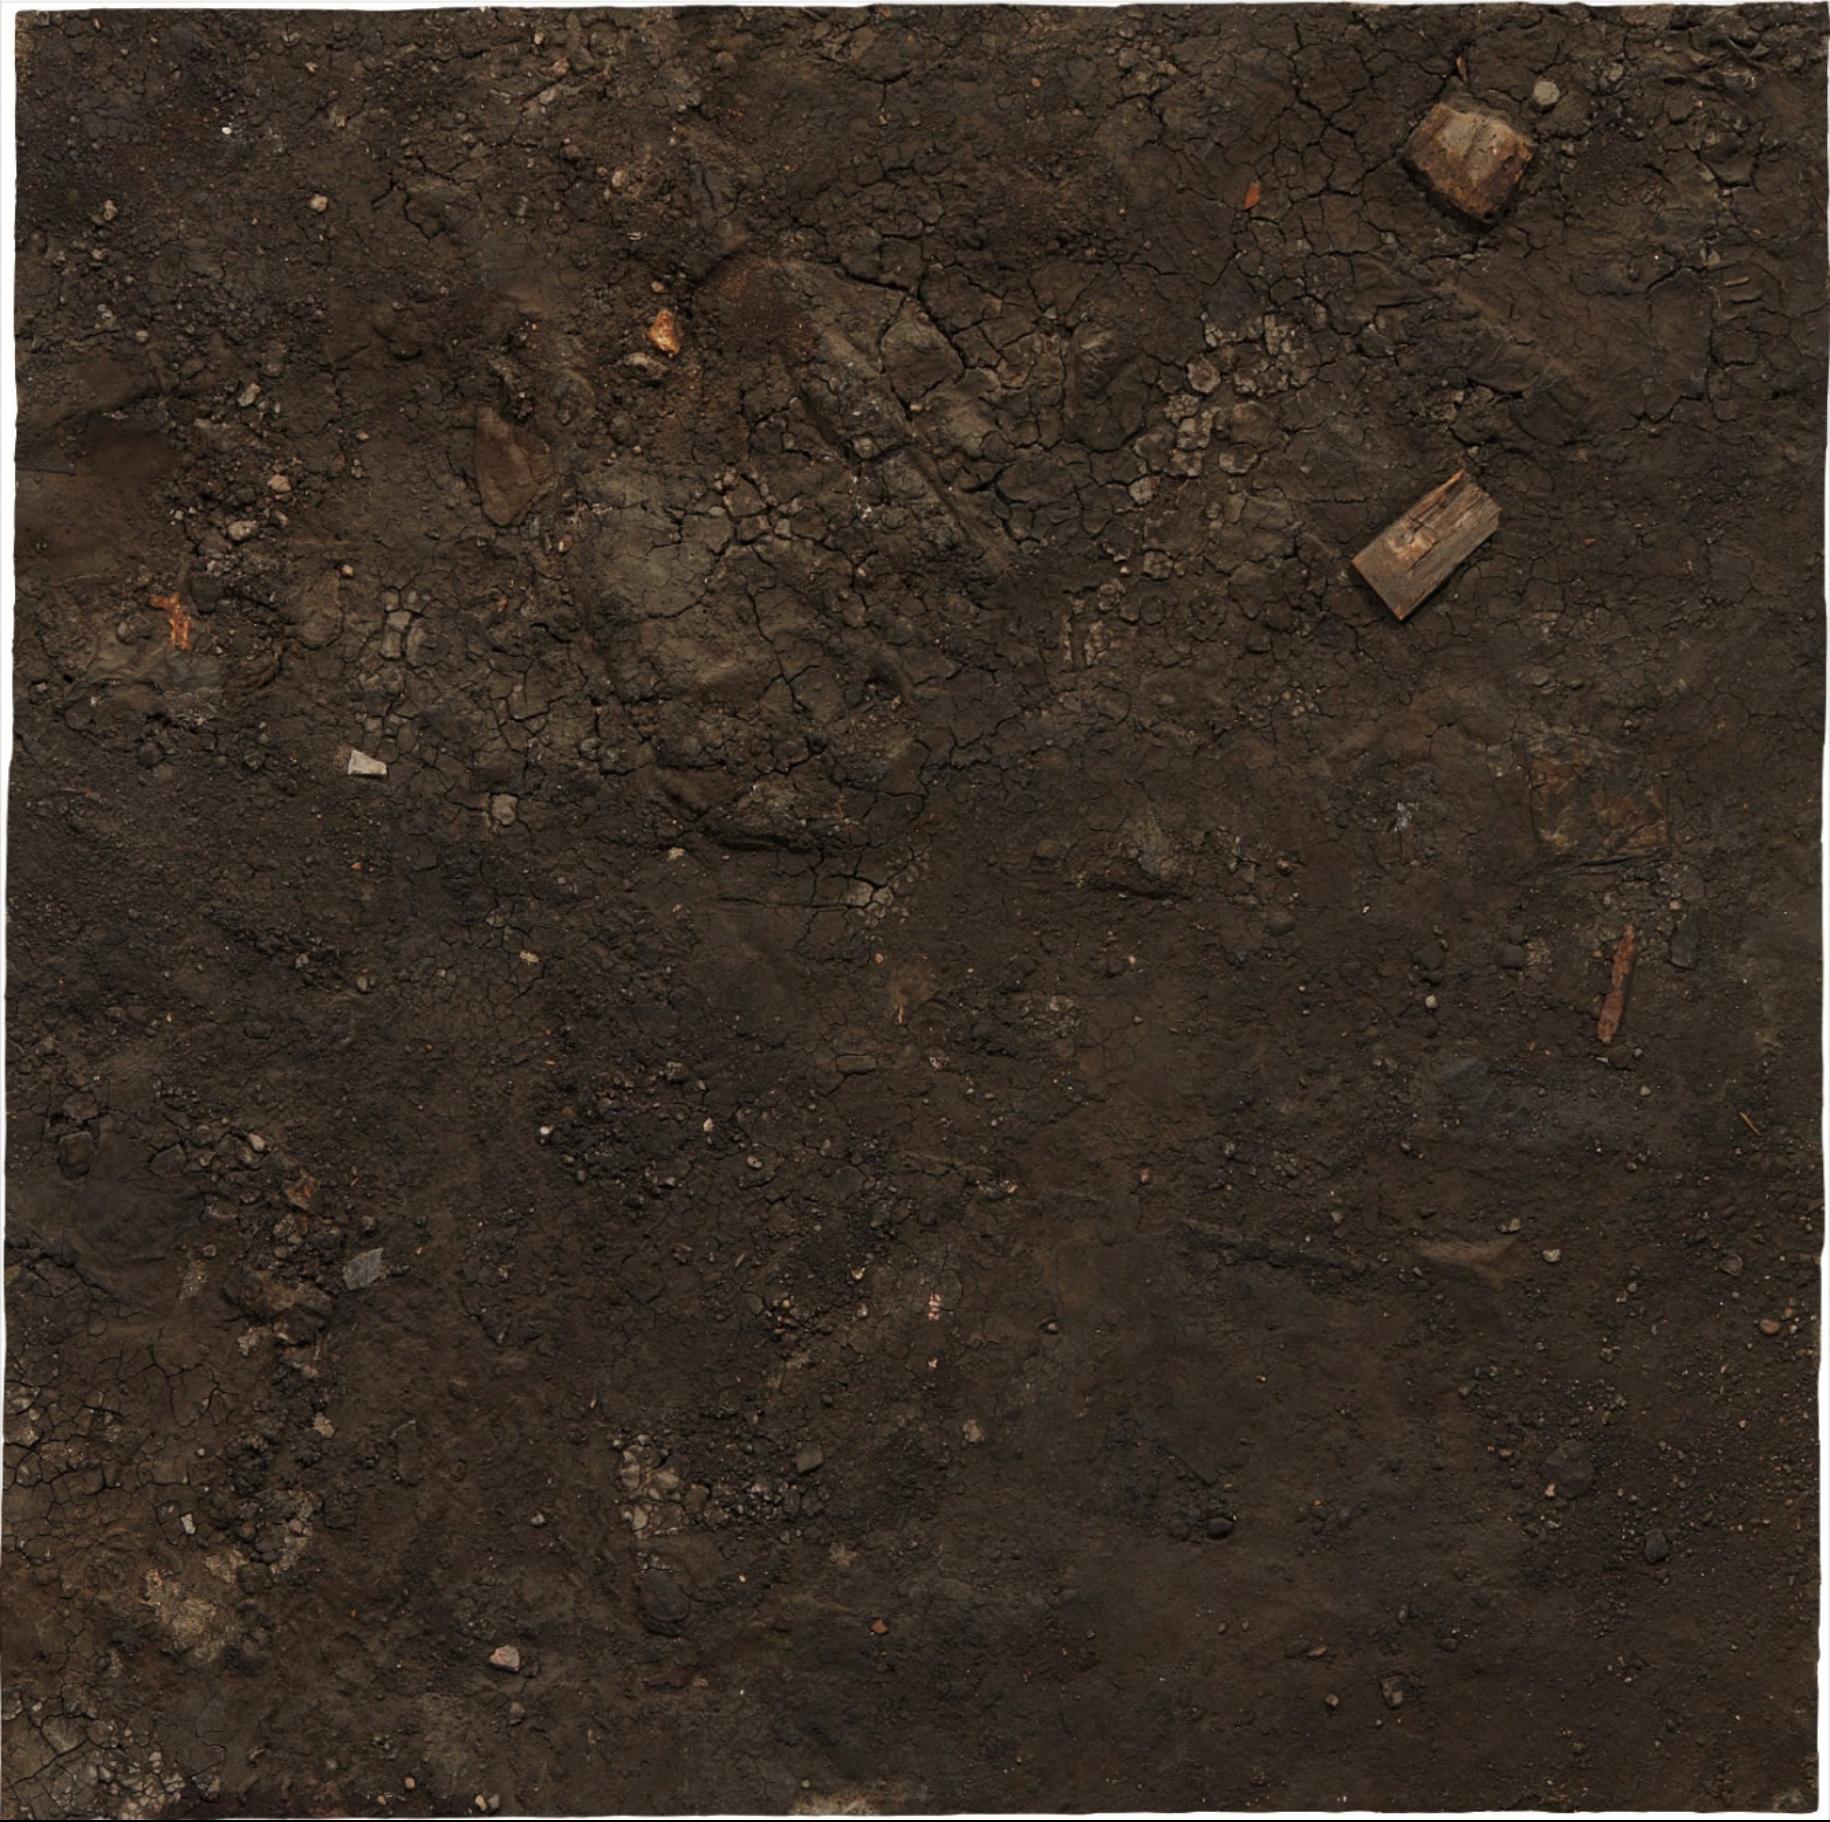 STUDY OF MUDCRACKS WITH BRICK AND DETRITUS, LORRYPARK SERIES - Mixed Media Art by Boyle Family